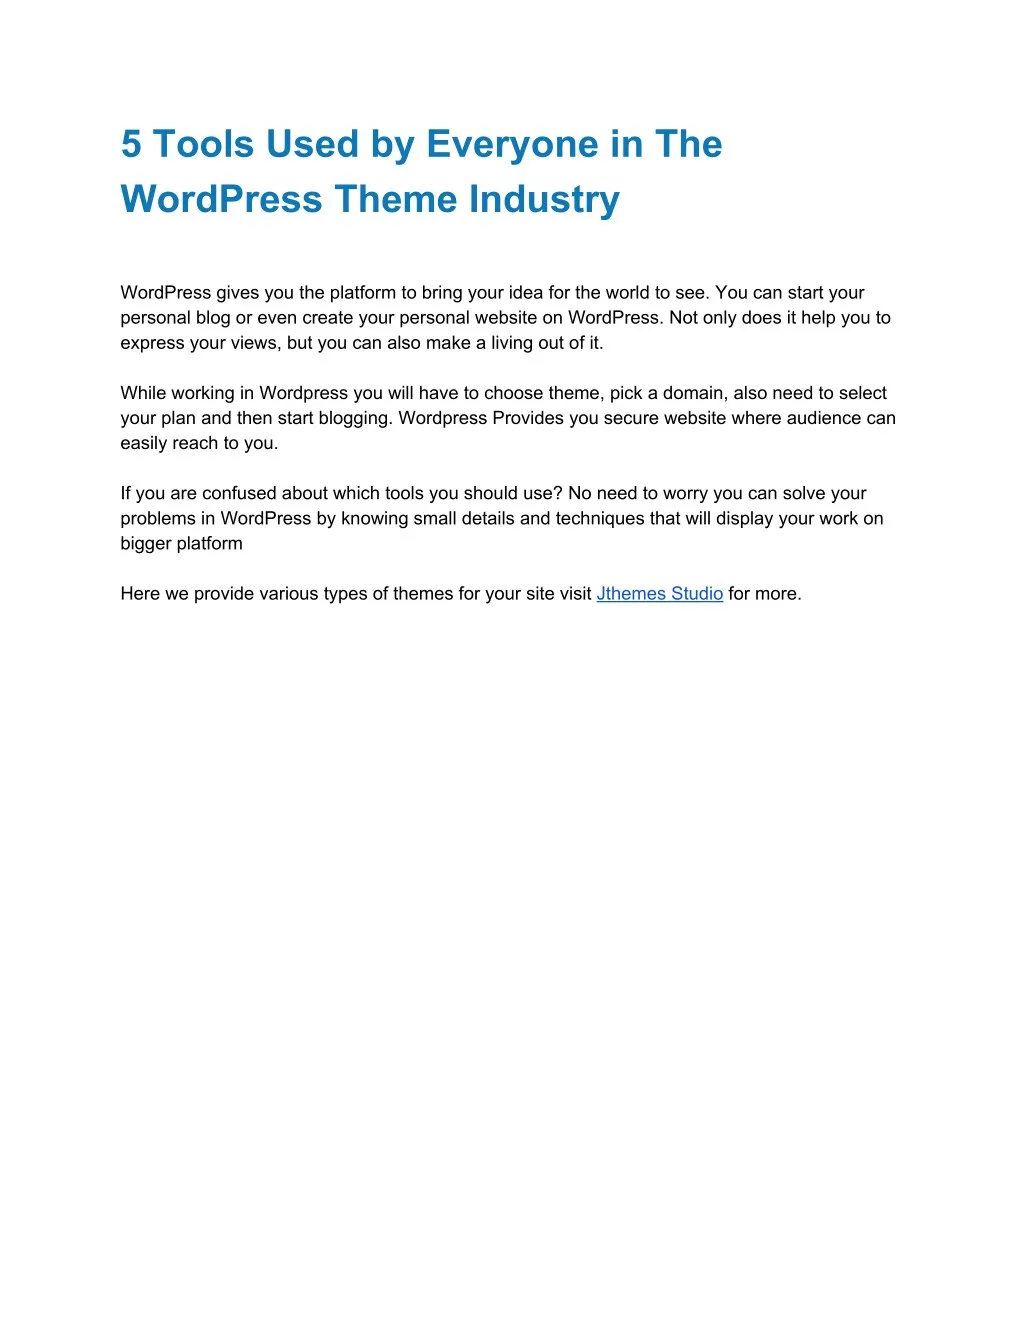 5 tools used by everyone in the wordpress theme